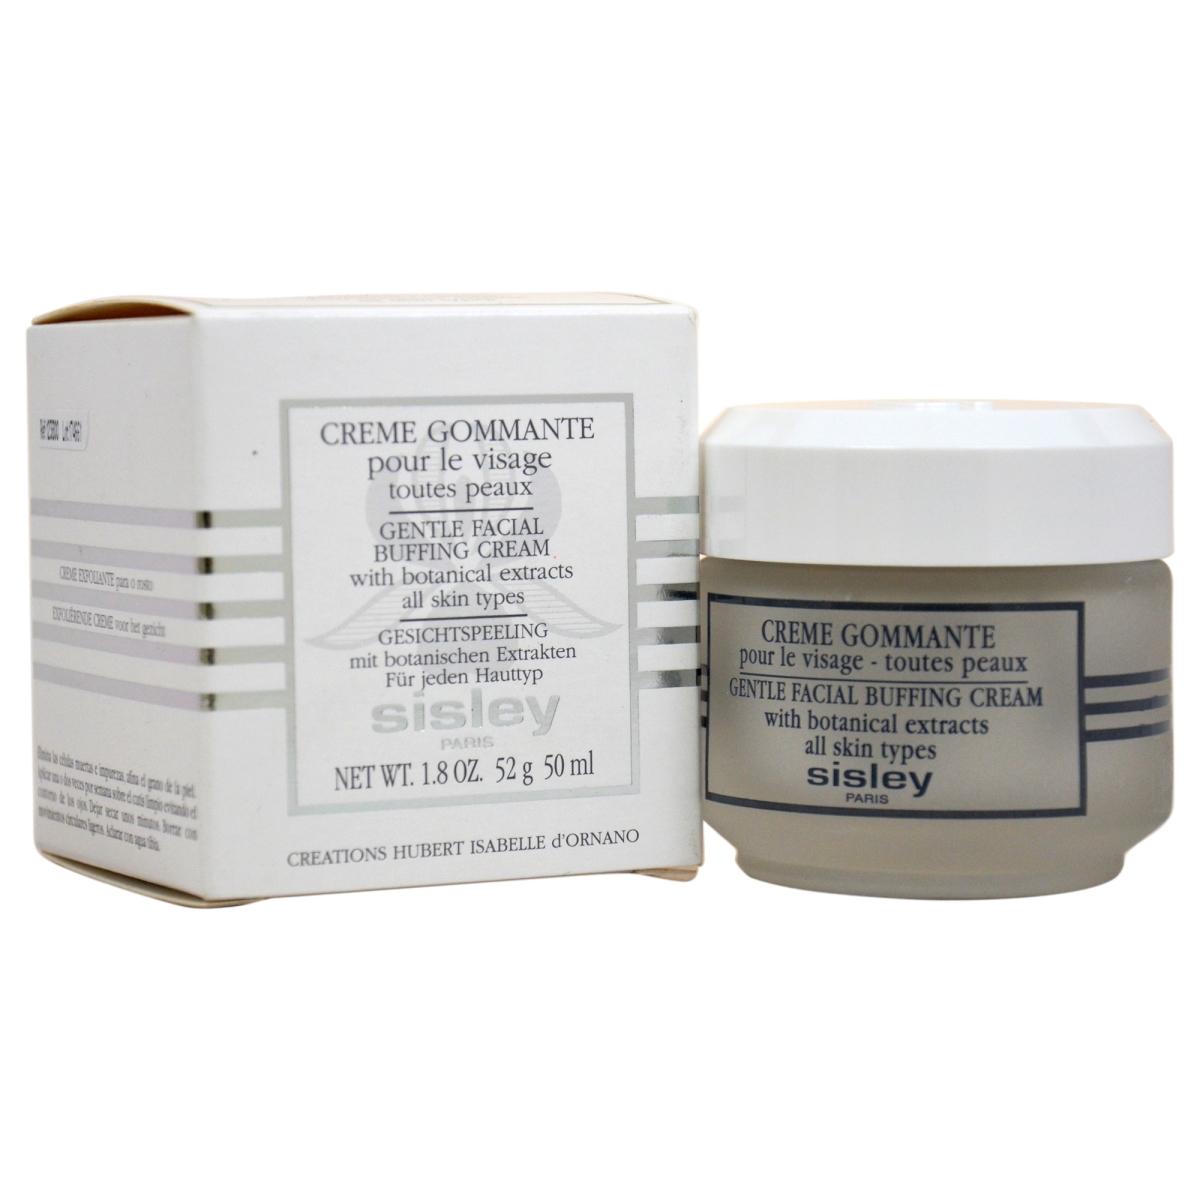 W-sc-2294 1.8 Oz Gentle Facial Buffing Botanical Extract Cream For Women